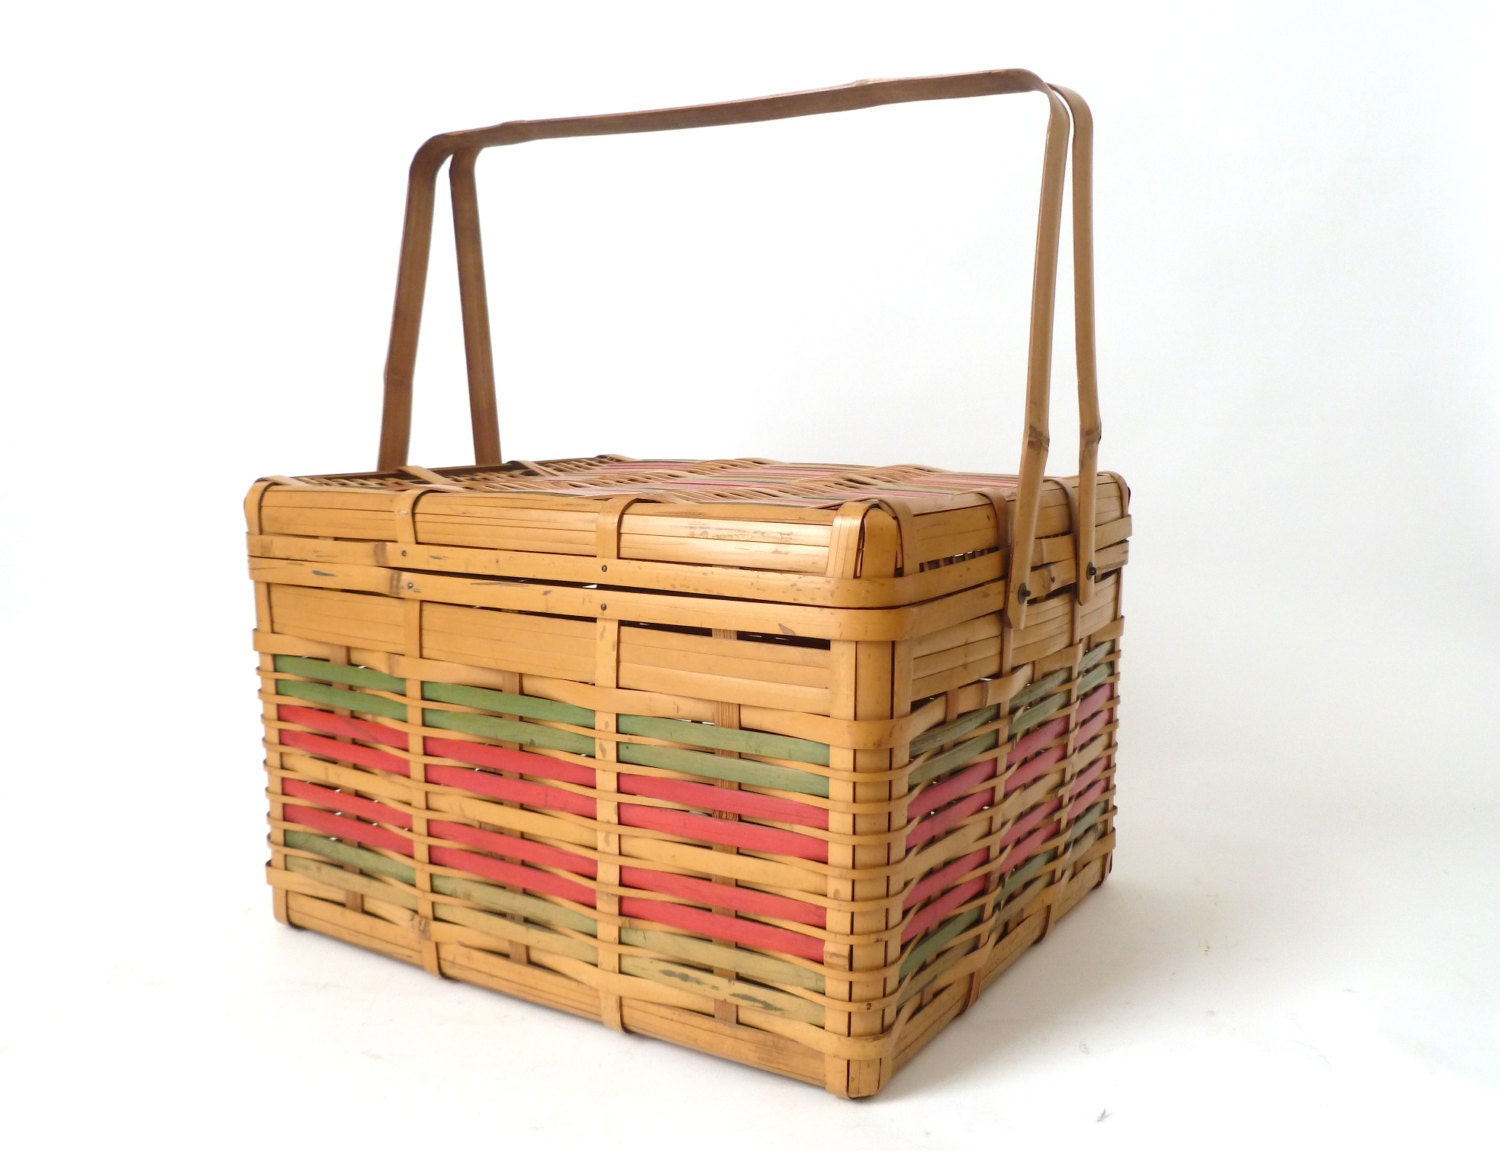 Vintage Wicker Sewing Basket ... Picnic Basket, Red and Green, Woven, Bamboo, Farmhouse, Cottage - cushionchicago